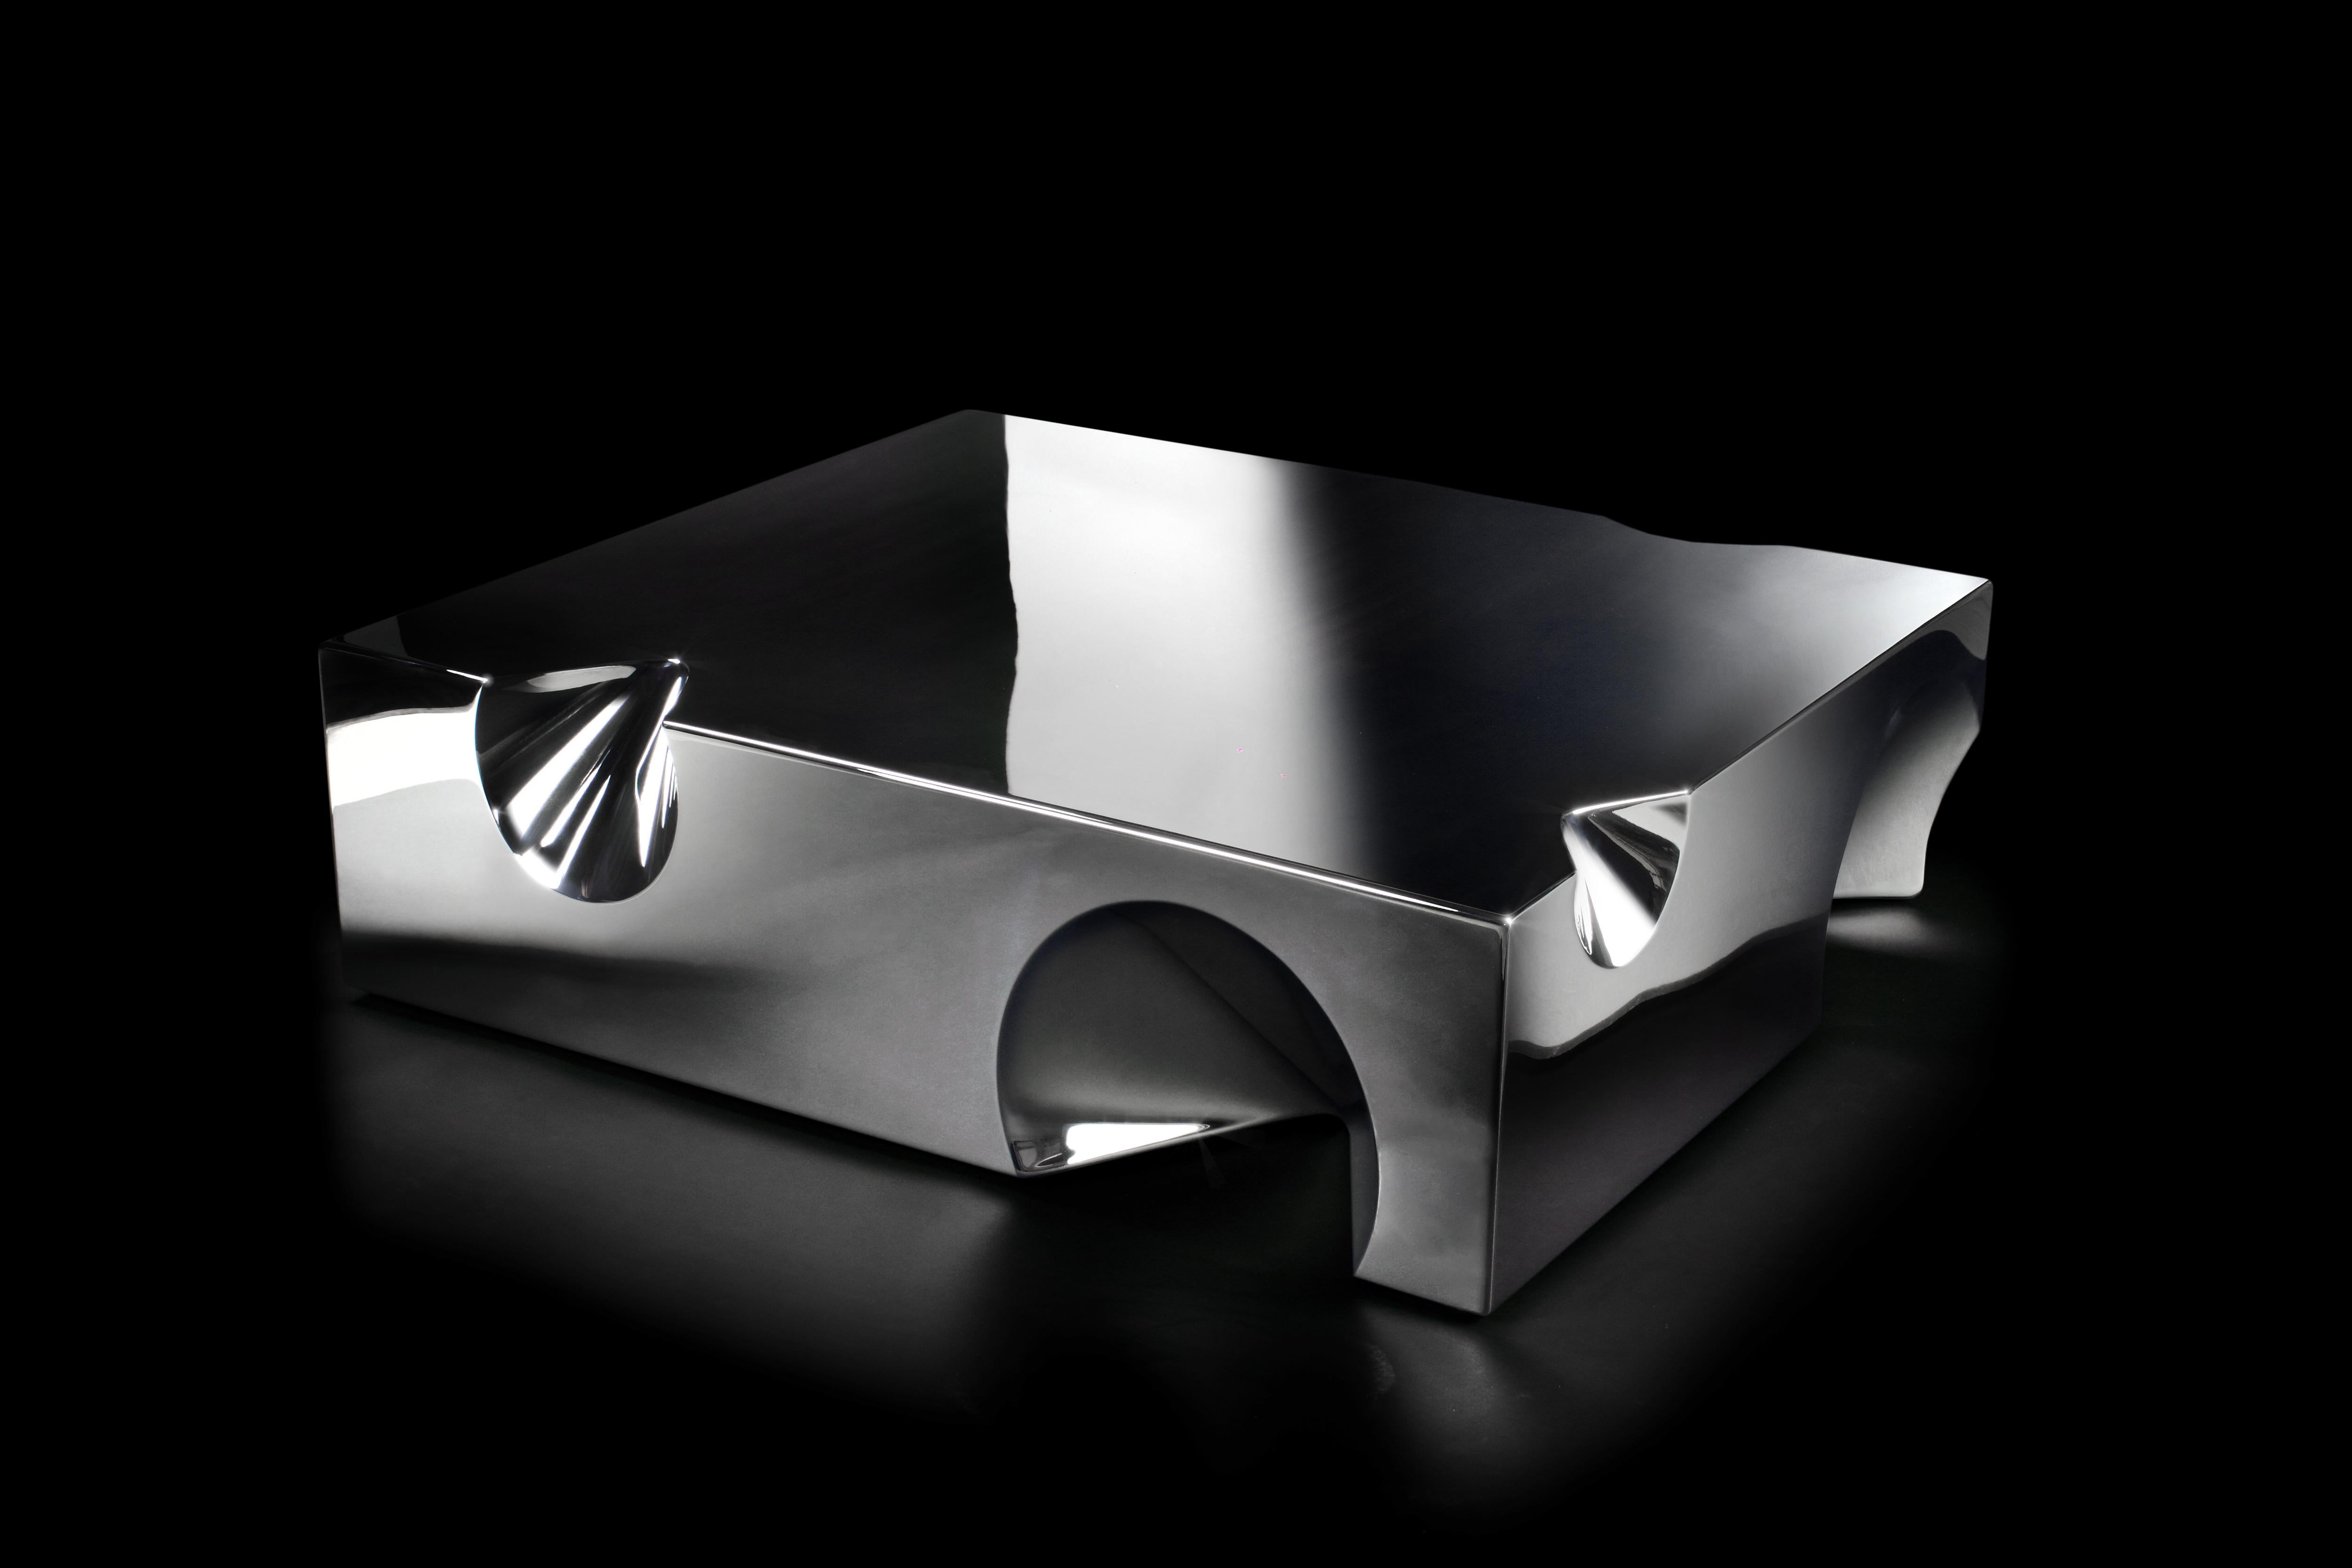 The 'Get Lost!' sculptural coffee table is made of mirror polished stainless steel. The table has a monolithic shape but inside it is hollow, the whole structure is manually welded and mirror polished. An artwork of great aesthetic impact, thanks to